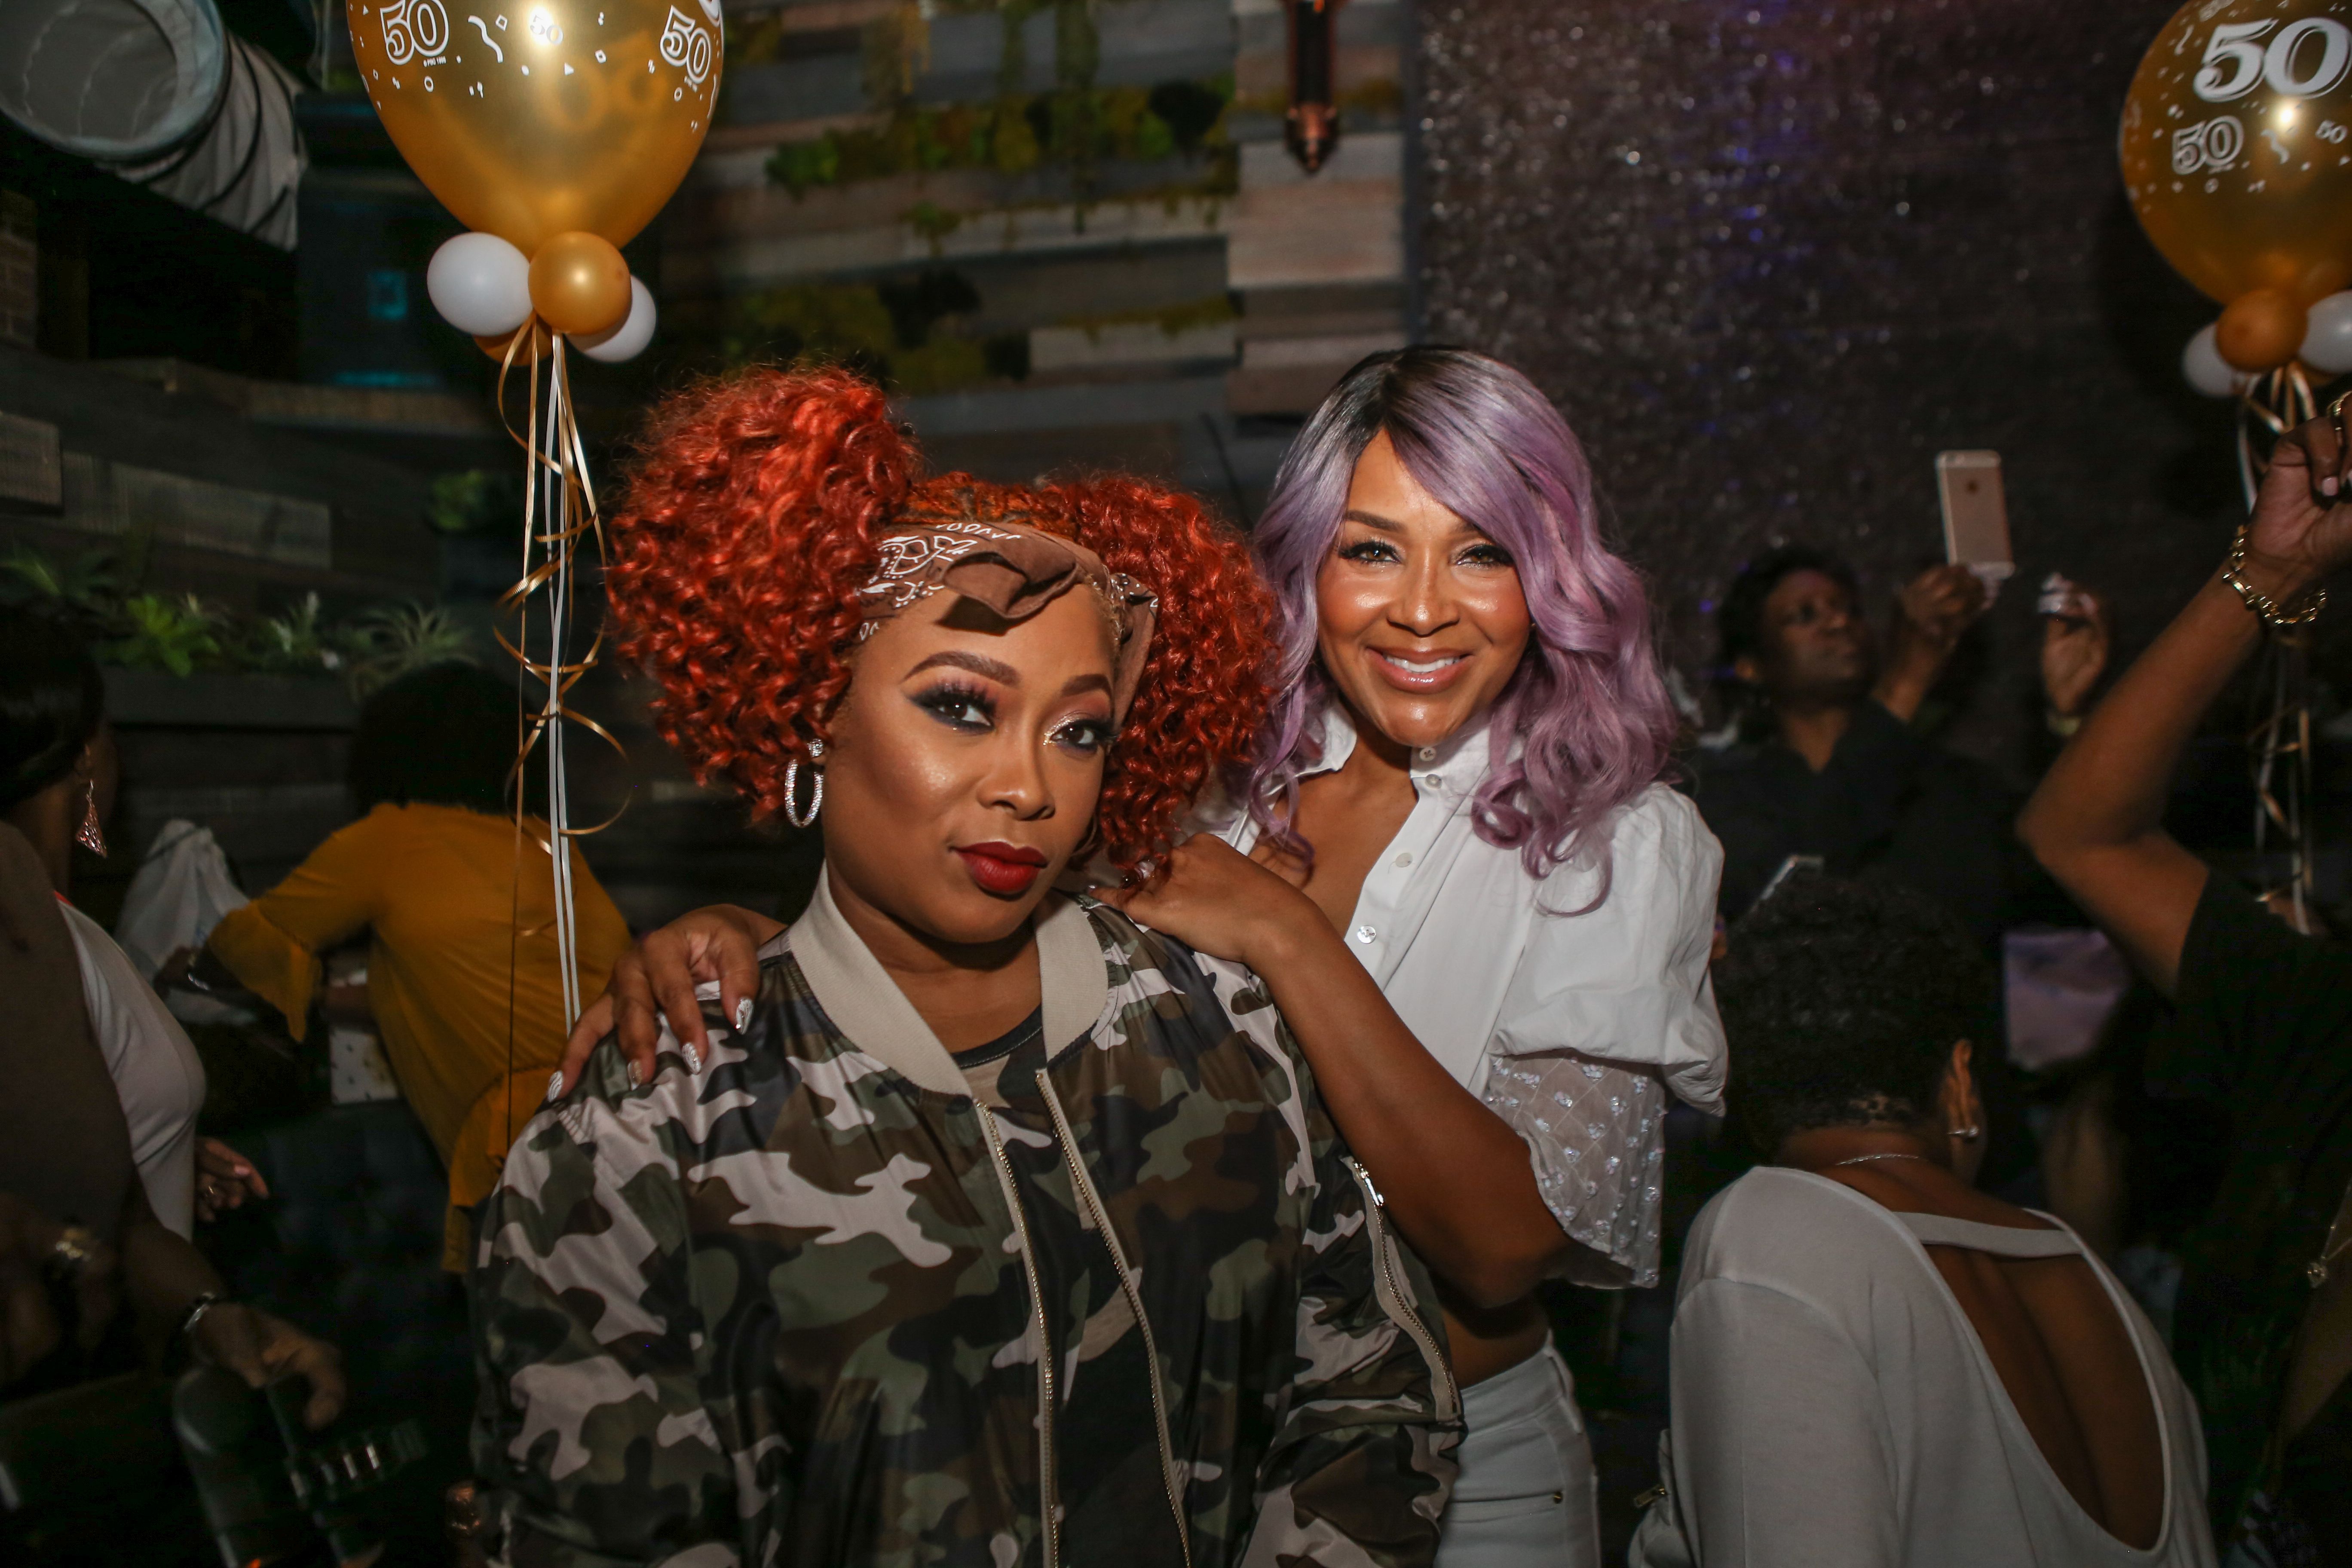 Da Brat and Lisa Raye McCoy at a lounge on September 23, 2017 in Los Angeles. | Photo: Getty Images